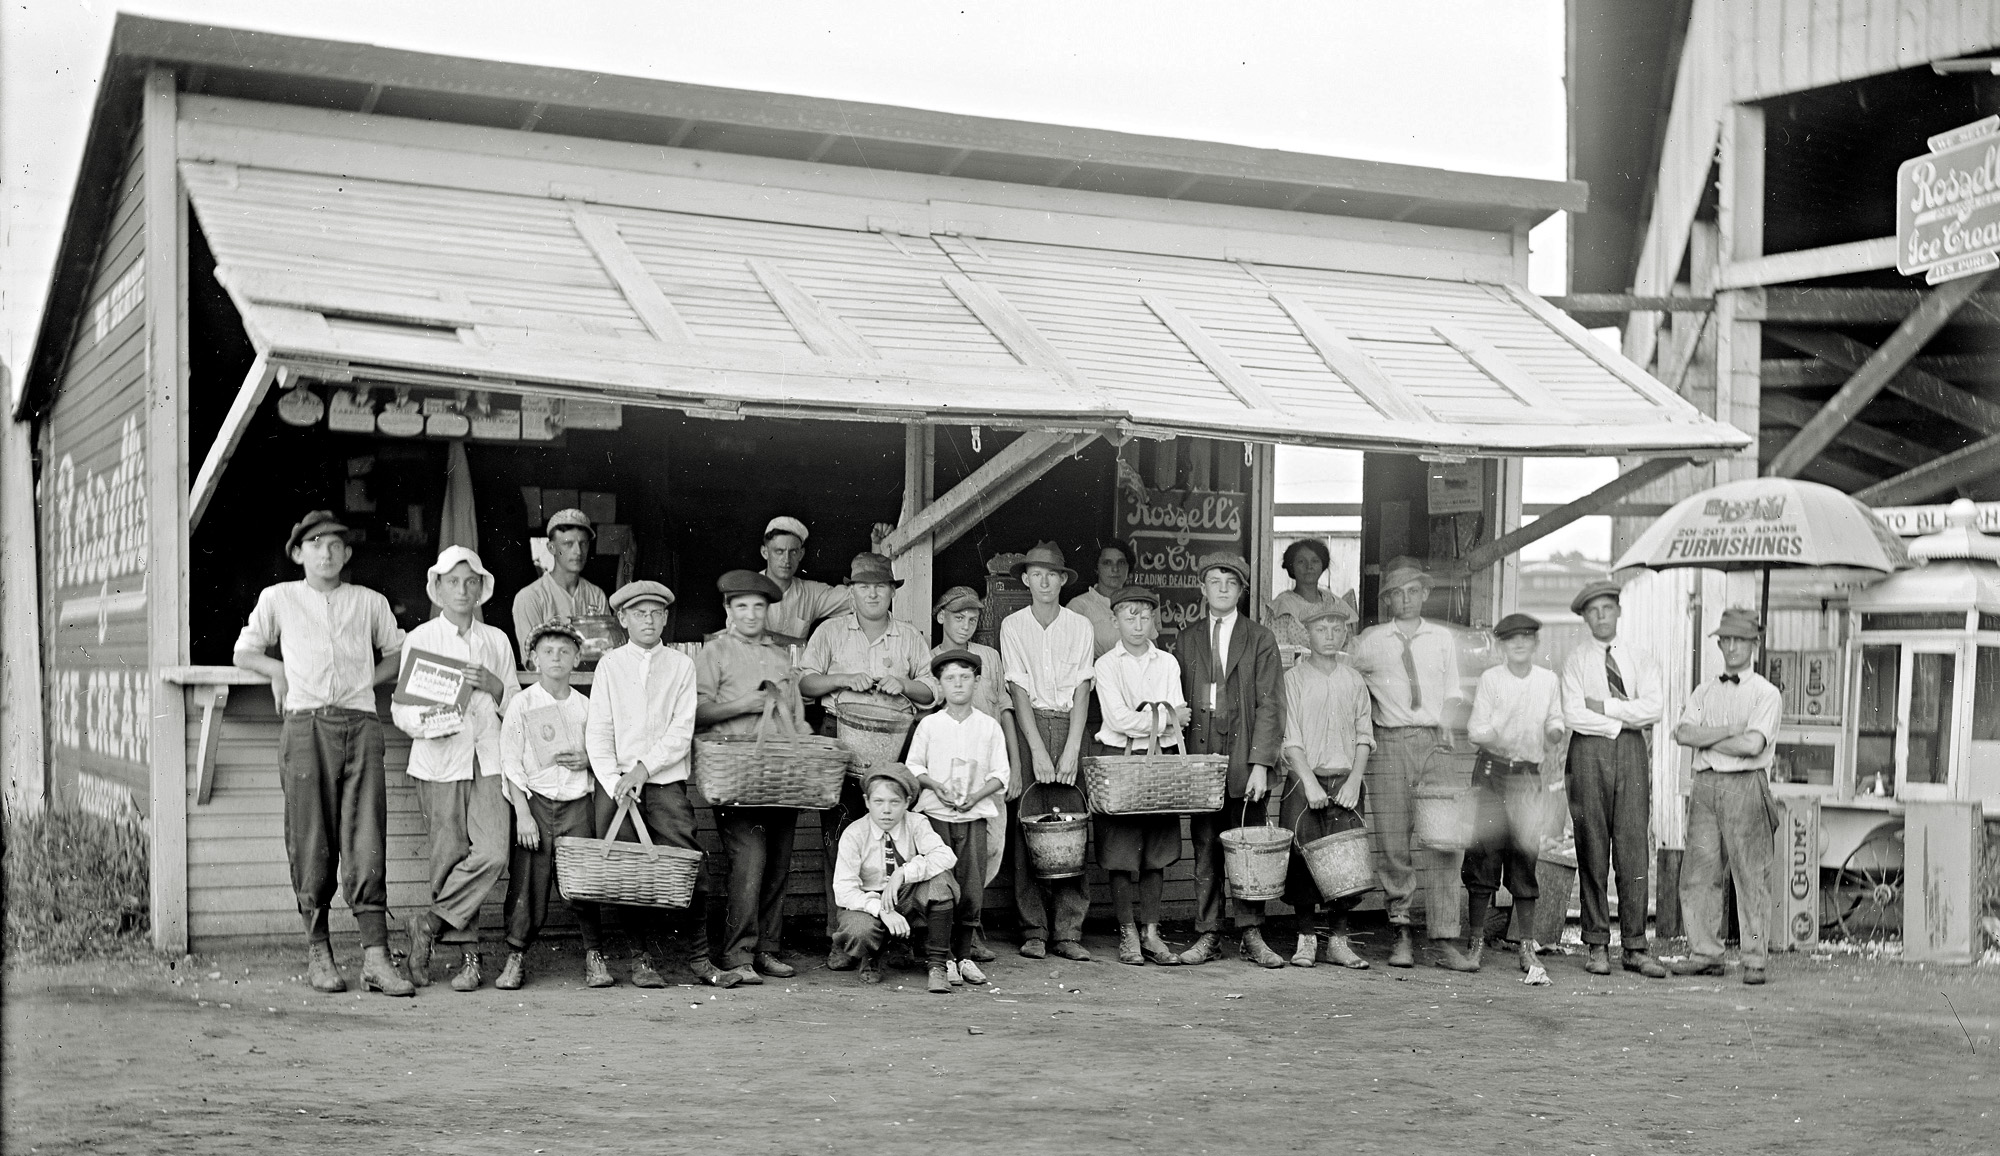 Concession stand runners and helpers, circa 1916, servicing the Lake View Park baseball field. Lake View Park (1883-1921).

Lake View Park was near the River, at the foot of Grant Street, Averyville-Peoria, Illinois. Lake View Park was the home of the Peoria Distillers, a Triple-I League team (Illinois-Indiana-Iowa League). The Peoria Distillers entered the league in 1905, winning three league championships; in 1911, 1916 and 1917. Baseball was suspended in 1918 on account of World War I, when the Distillers returned in 1919, they changed their name to the Peoria Tractors. View full size.